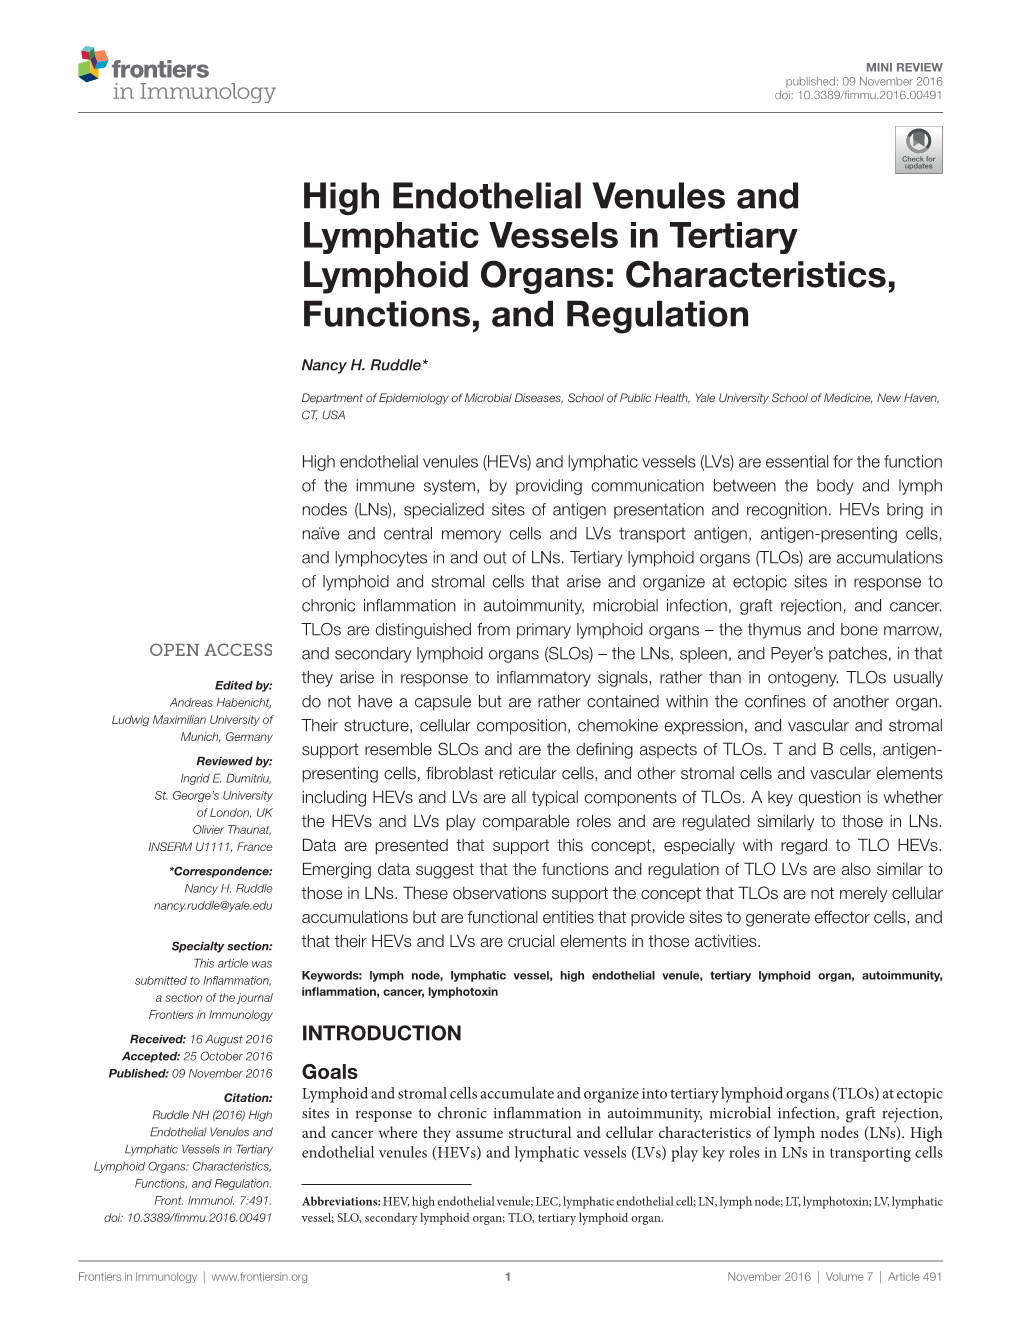 High Endothelial Venules and Lymphatic Vessels in Tertiary Lymphoid Organs: Characteristics, Functions, and Regulation